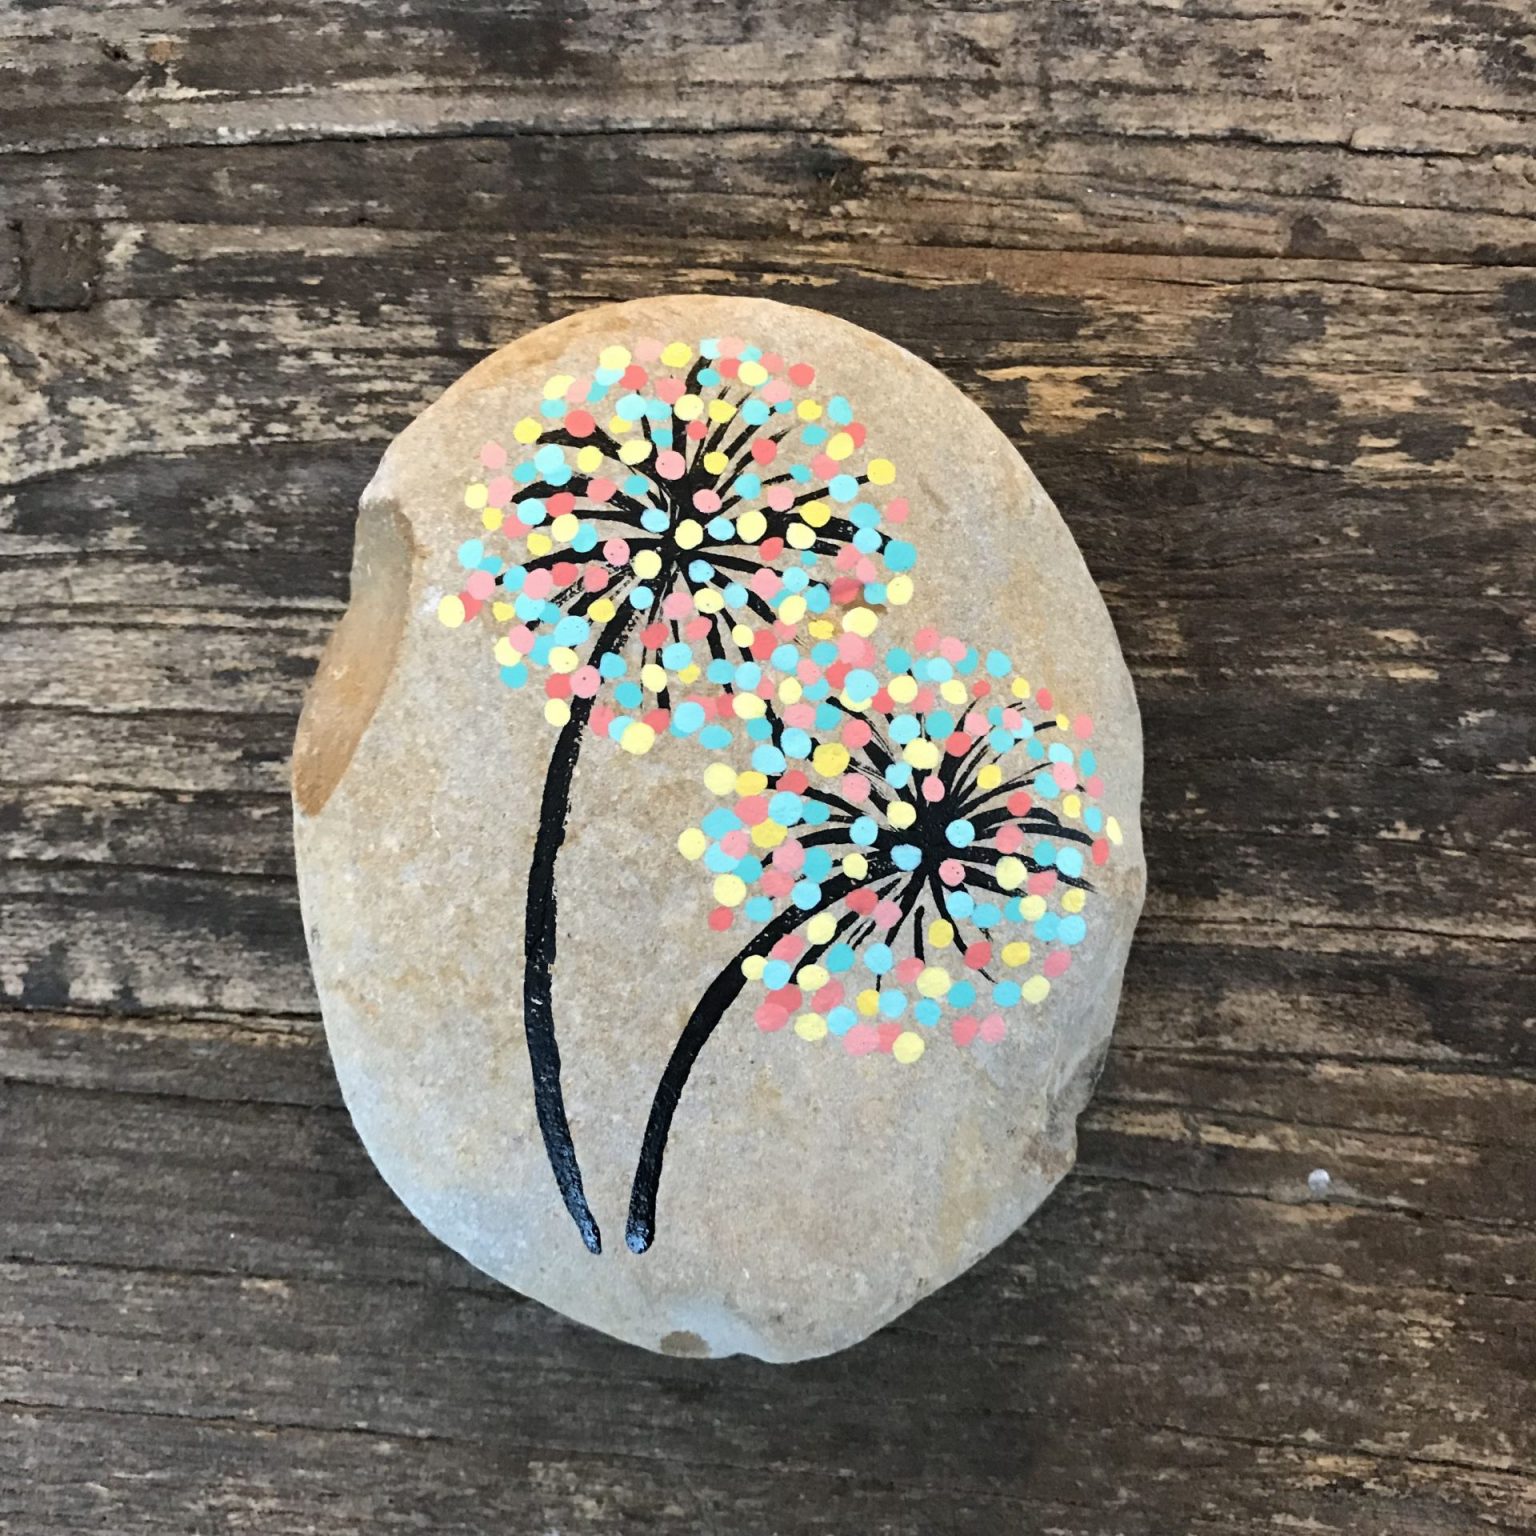 Easy Rock Painting Ideas For Beginners Cute Designs Nrb